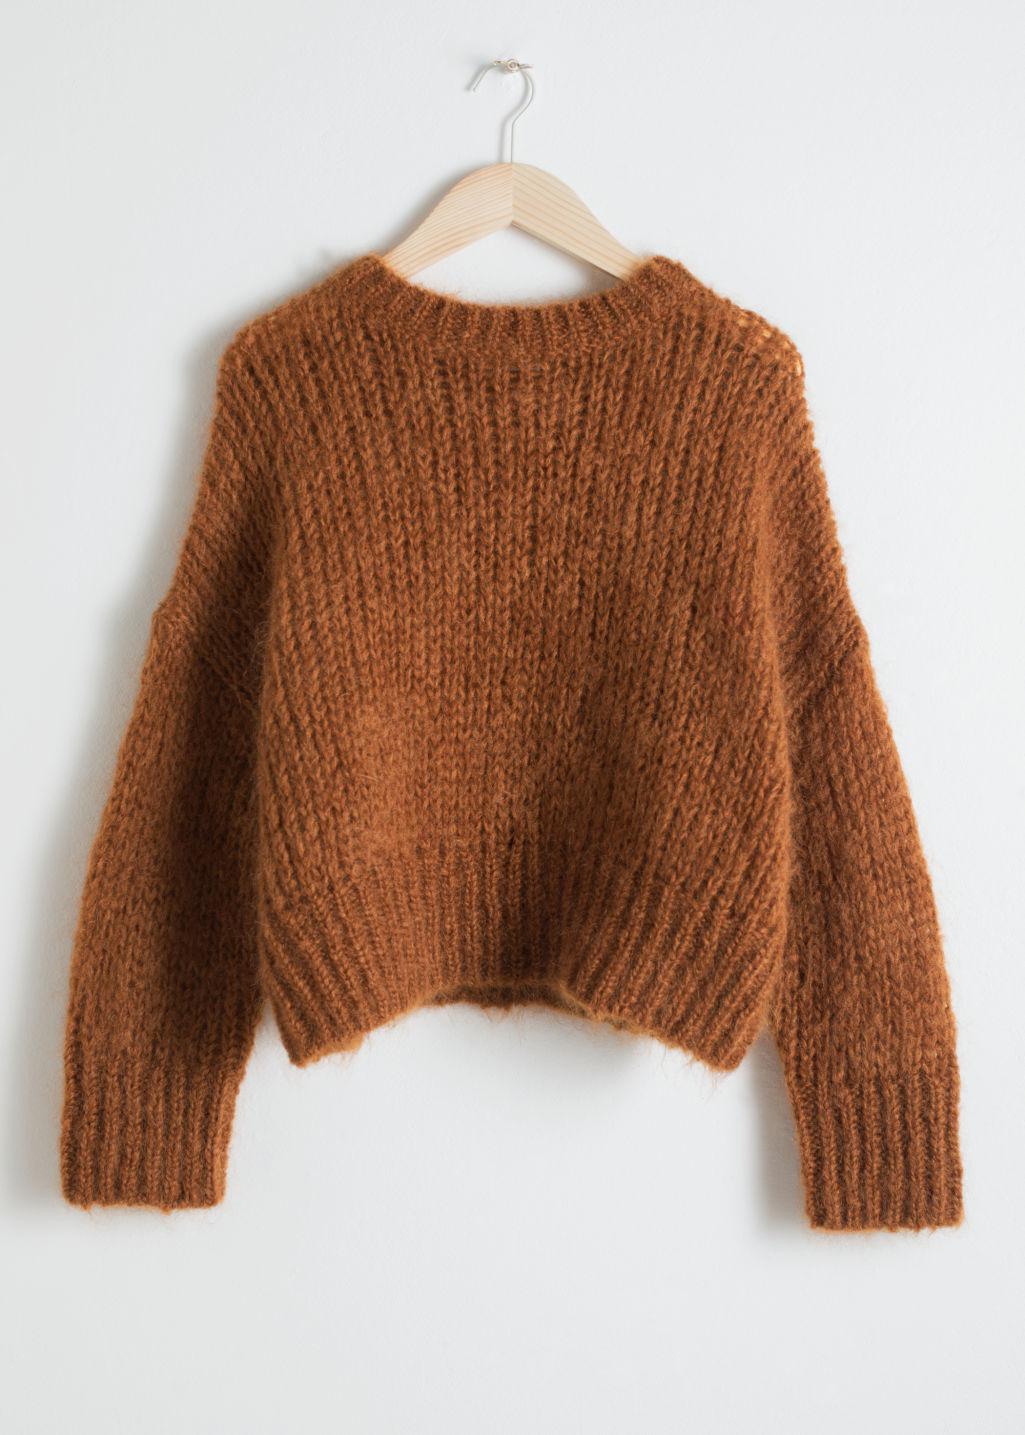 & Other Stories Wool Blend Chunky Knit Sweater in Orange - Lyst